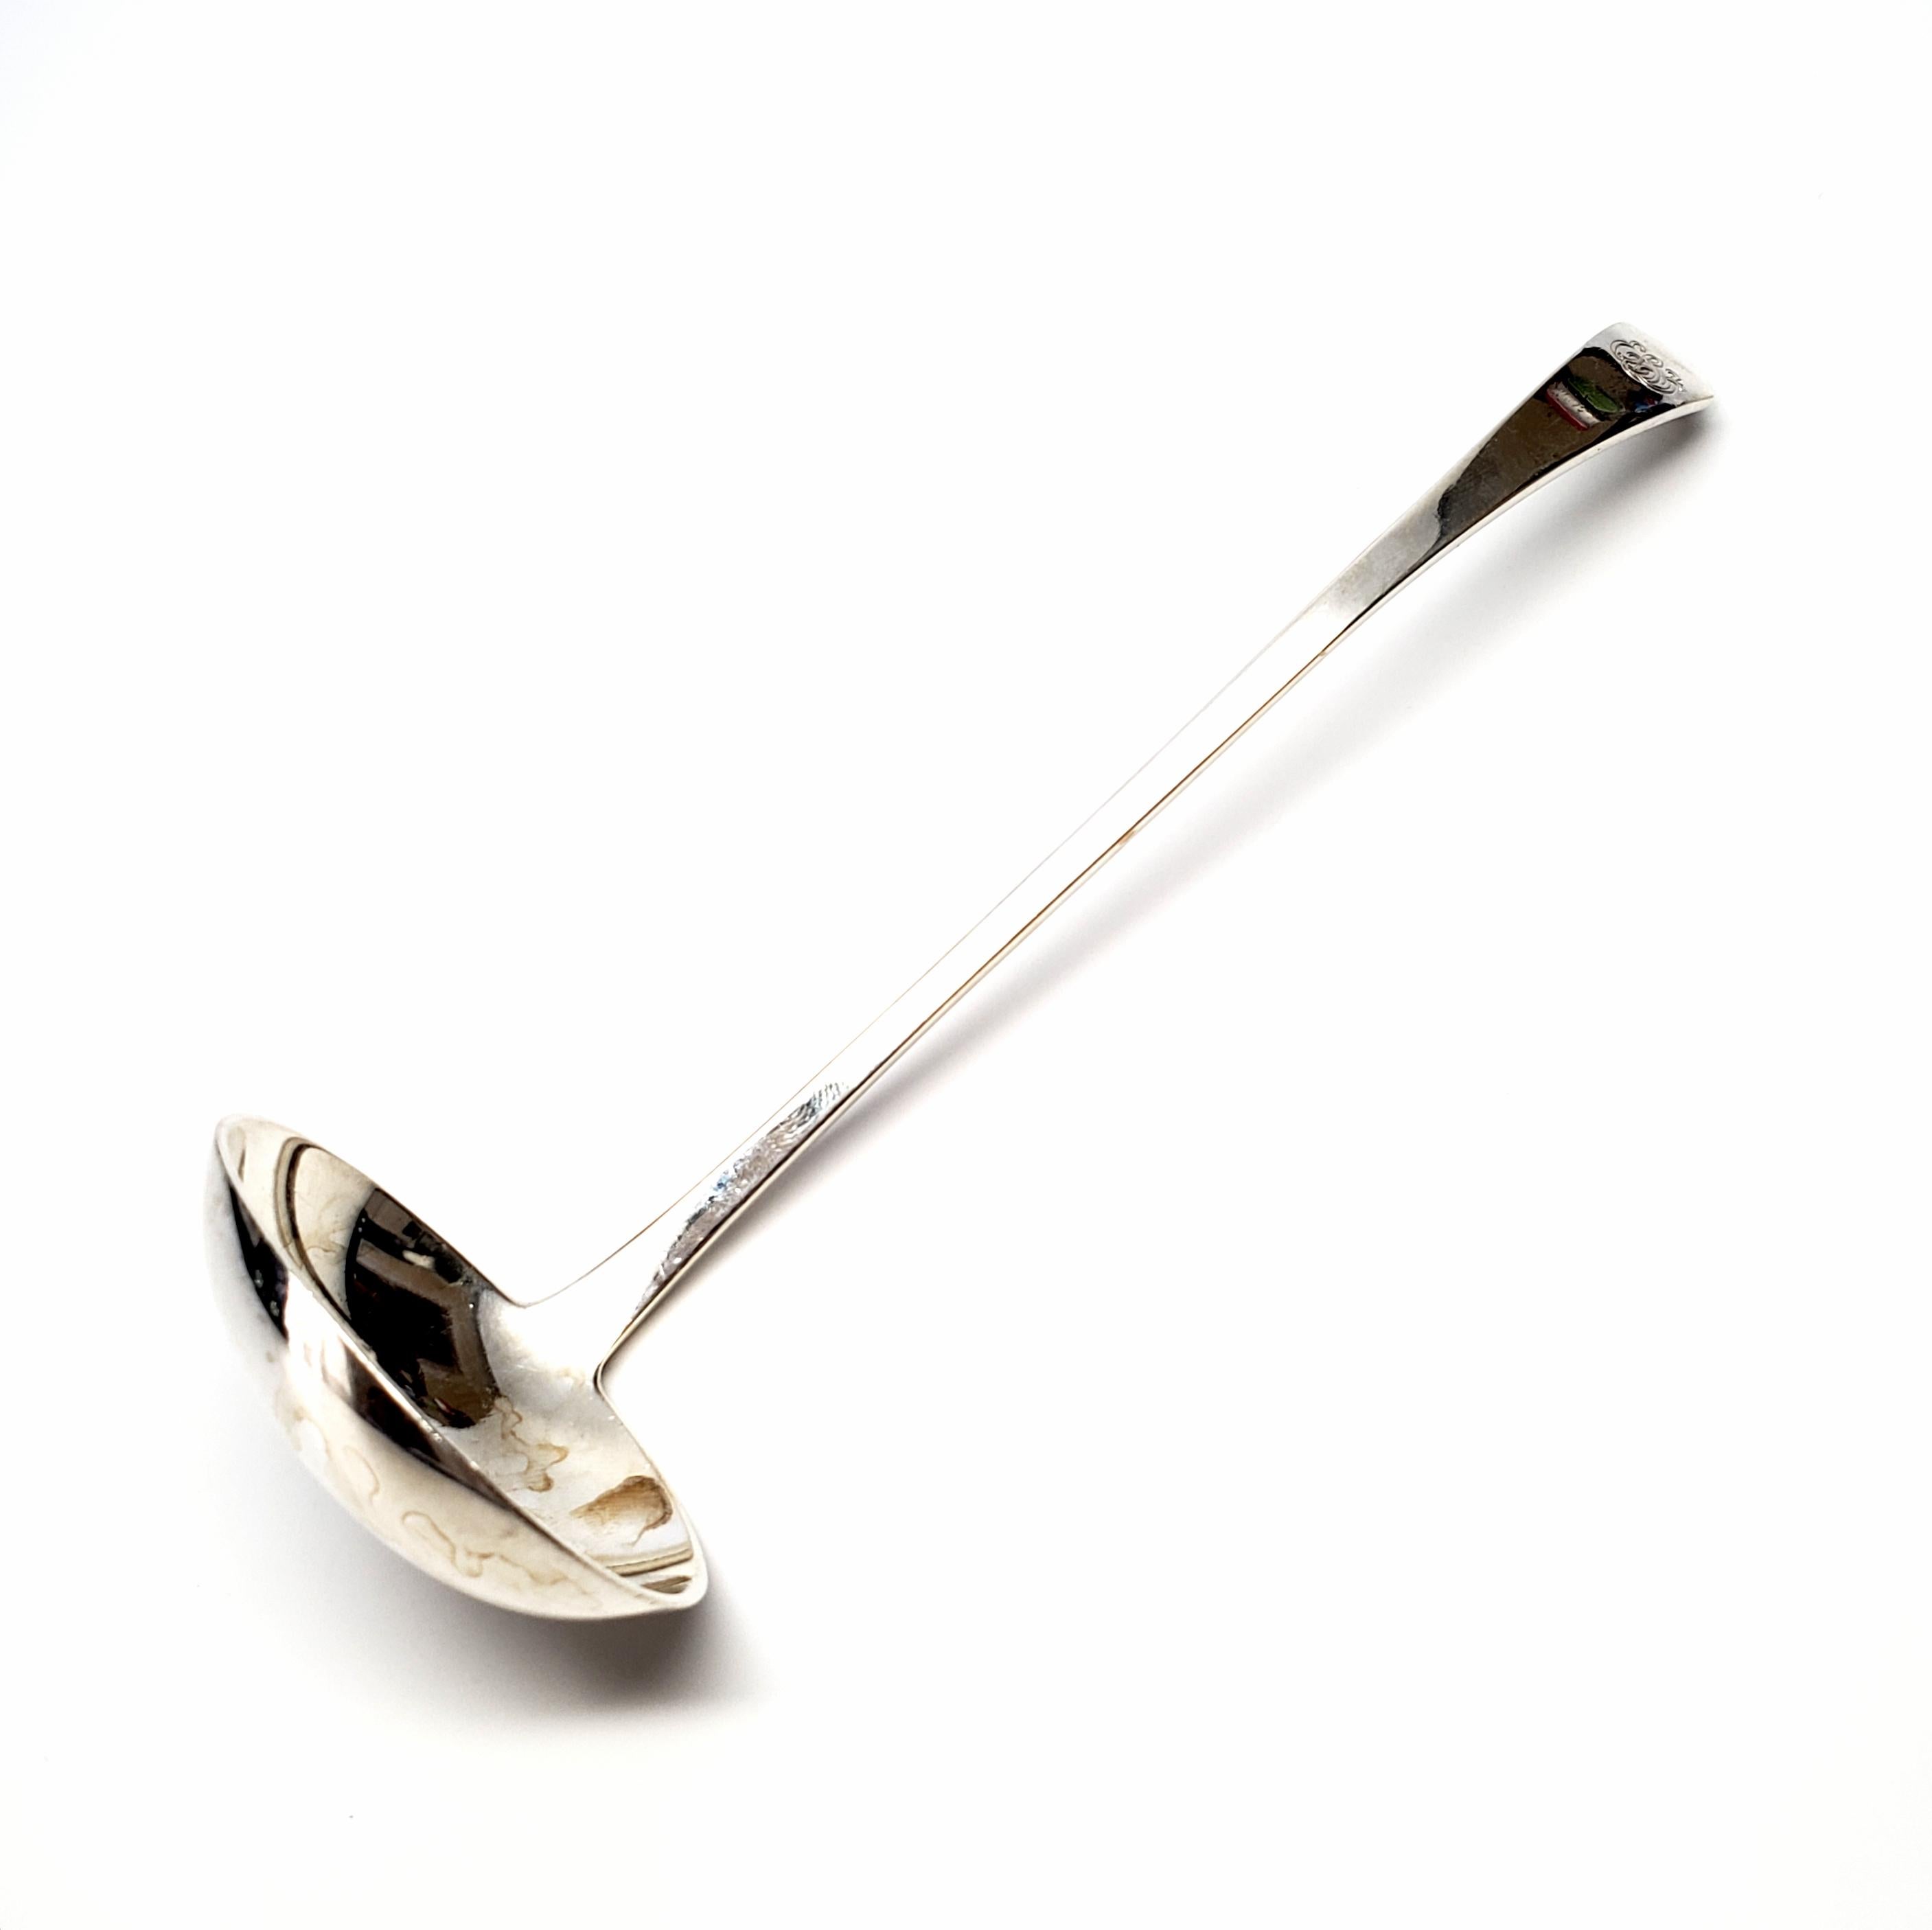 Antique sterling silver gravy ladle by Tiffany & Co. in the Clinton pattern.

Monogram appears to be EBF

Beautiful ladle with a small oval bowl. The Clinton pattern was in production from 1912-1955. The pattern's clean and timeless design makes